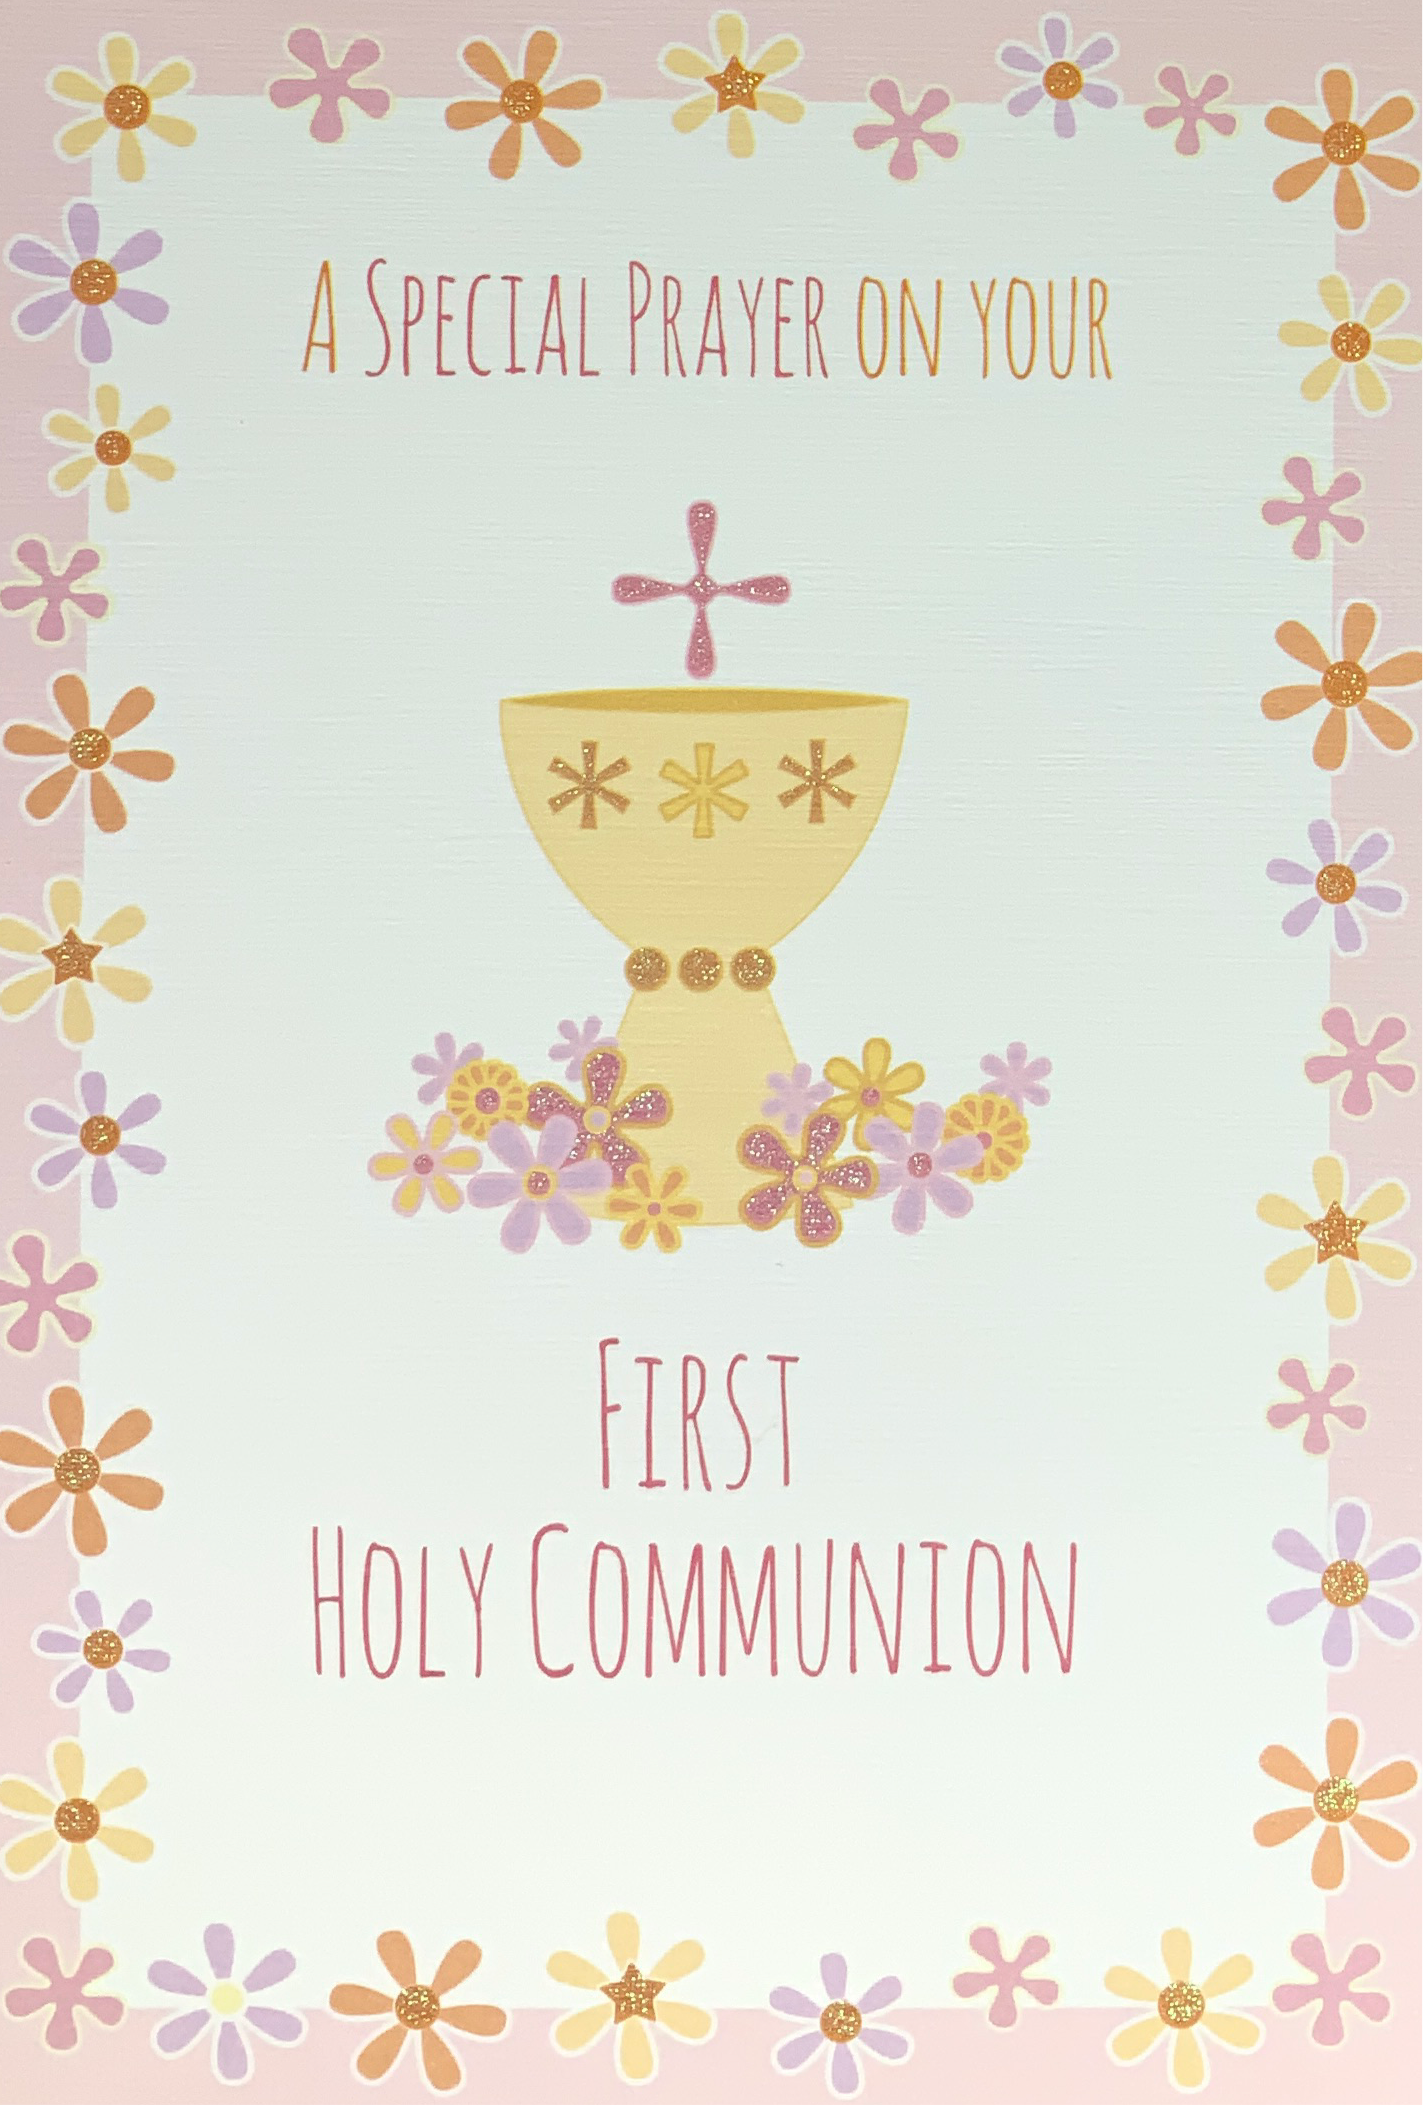 Communion Card - A Special Preyer On Your First Holy Communion